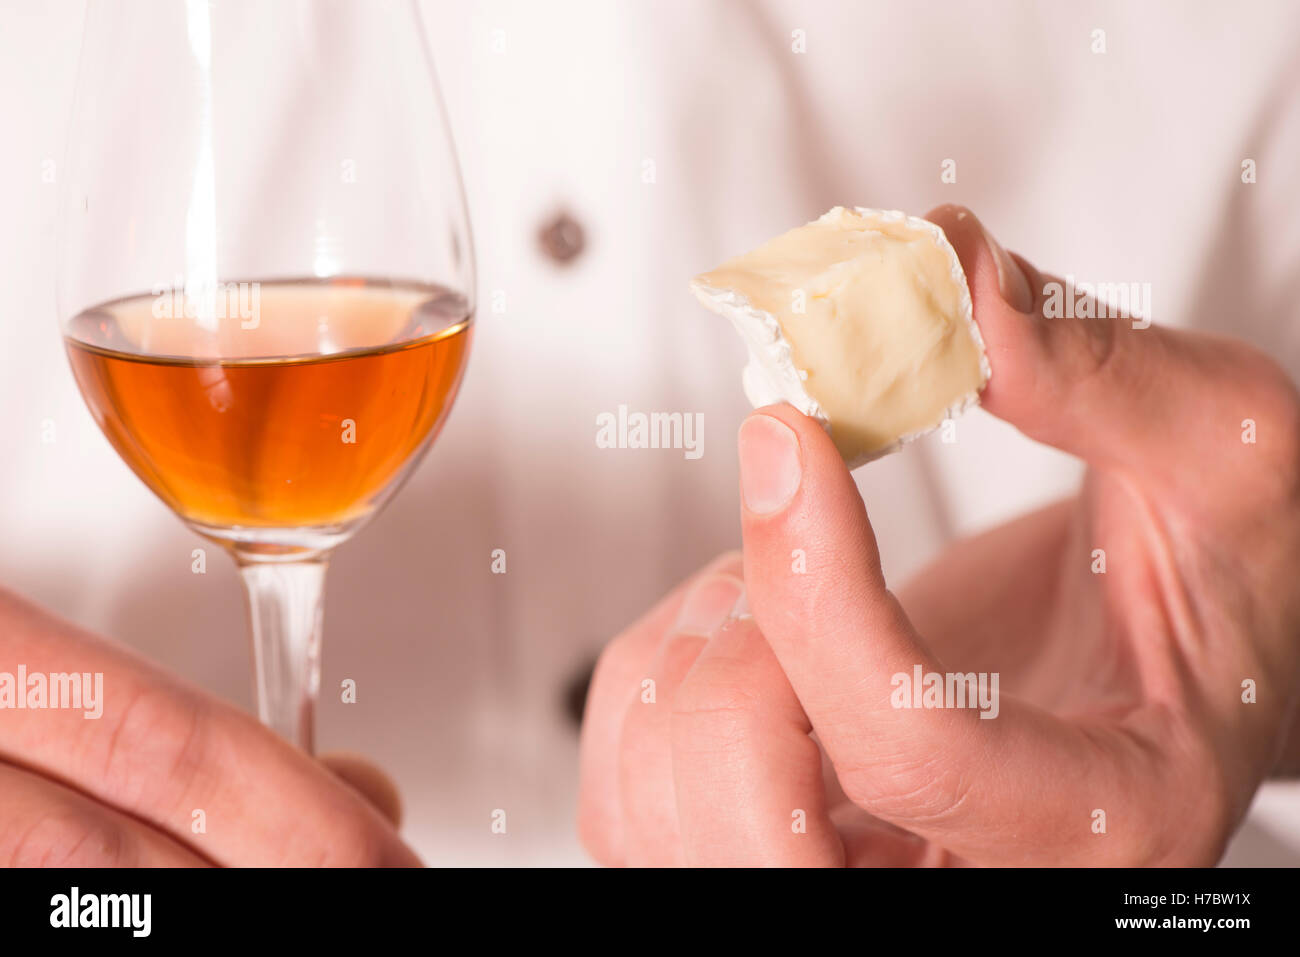 Sherry in a glass and hand holding a piece of brie cheese. Snack or appetizer. Stock Photo